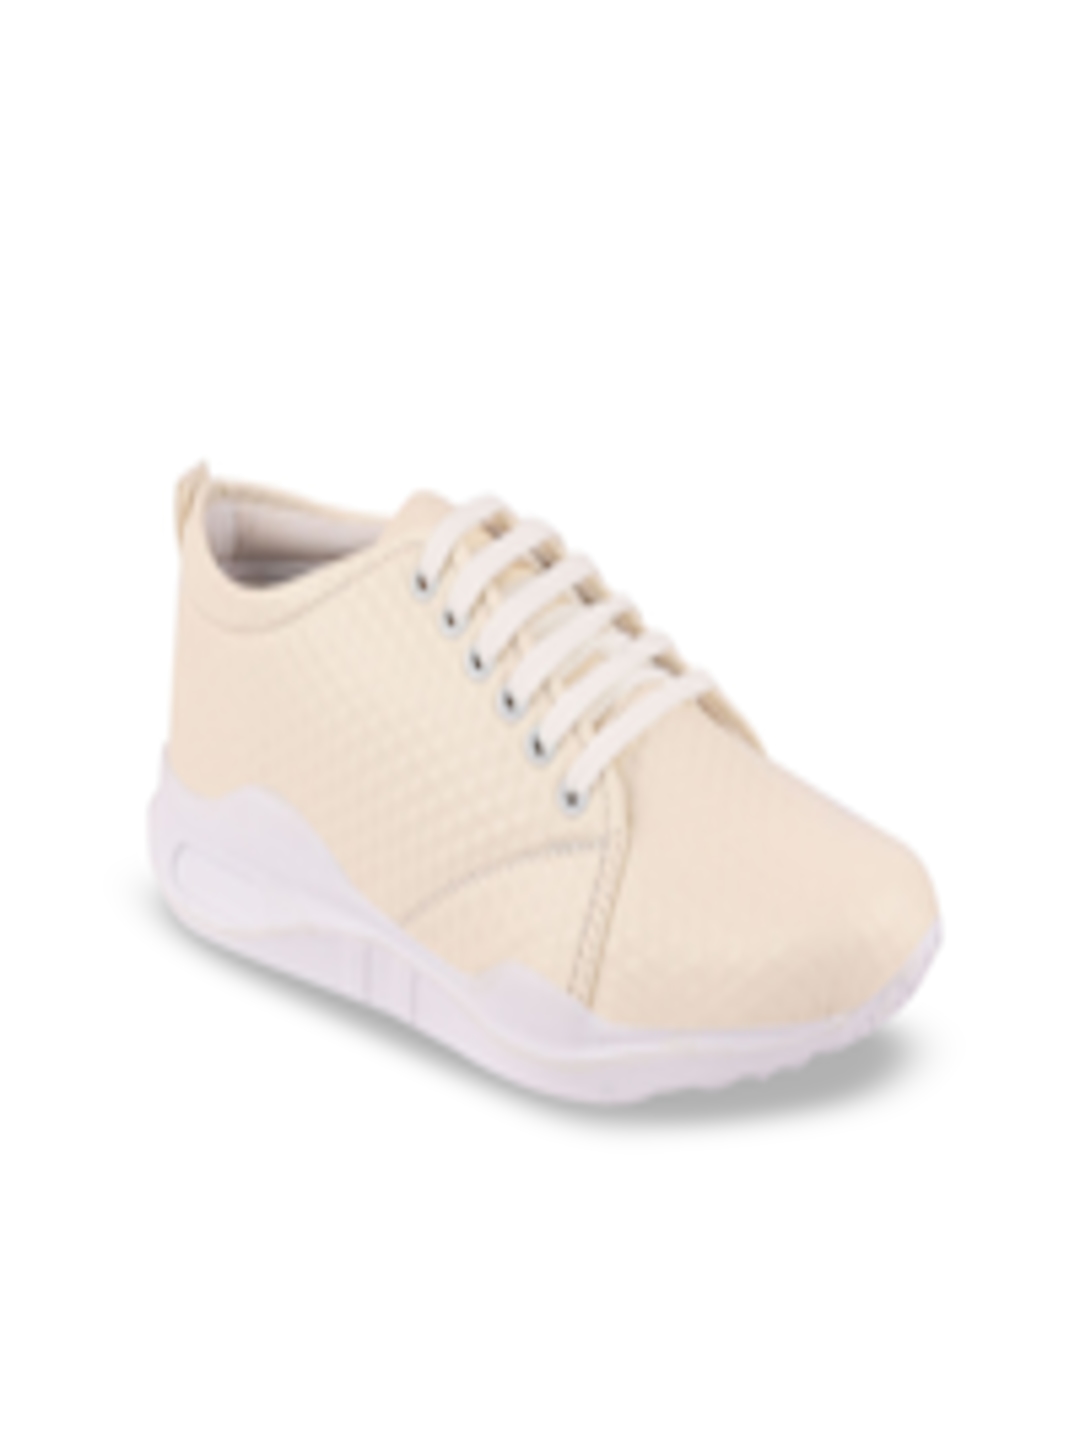 Buy FAUSTO Men Cream Coloured Sneakers Casual Shoes for